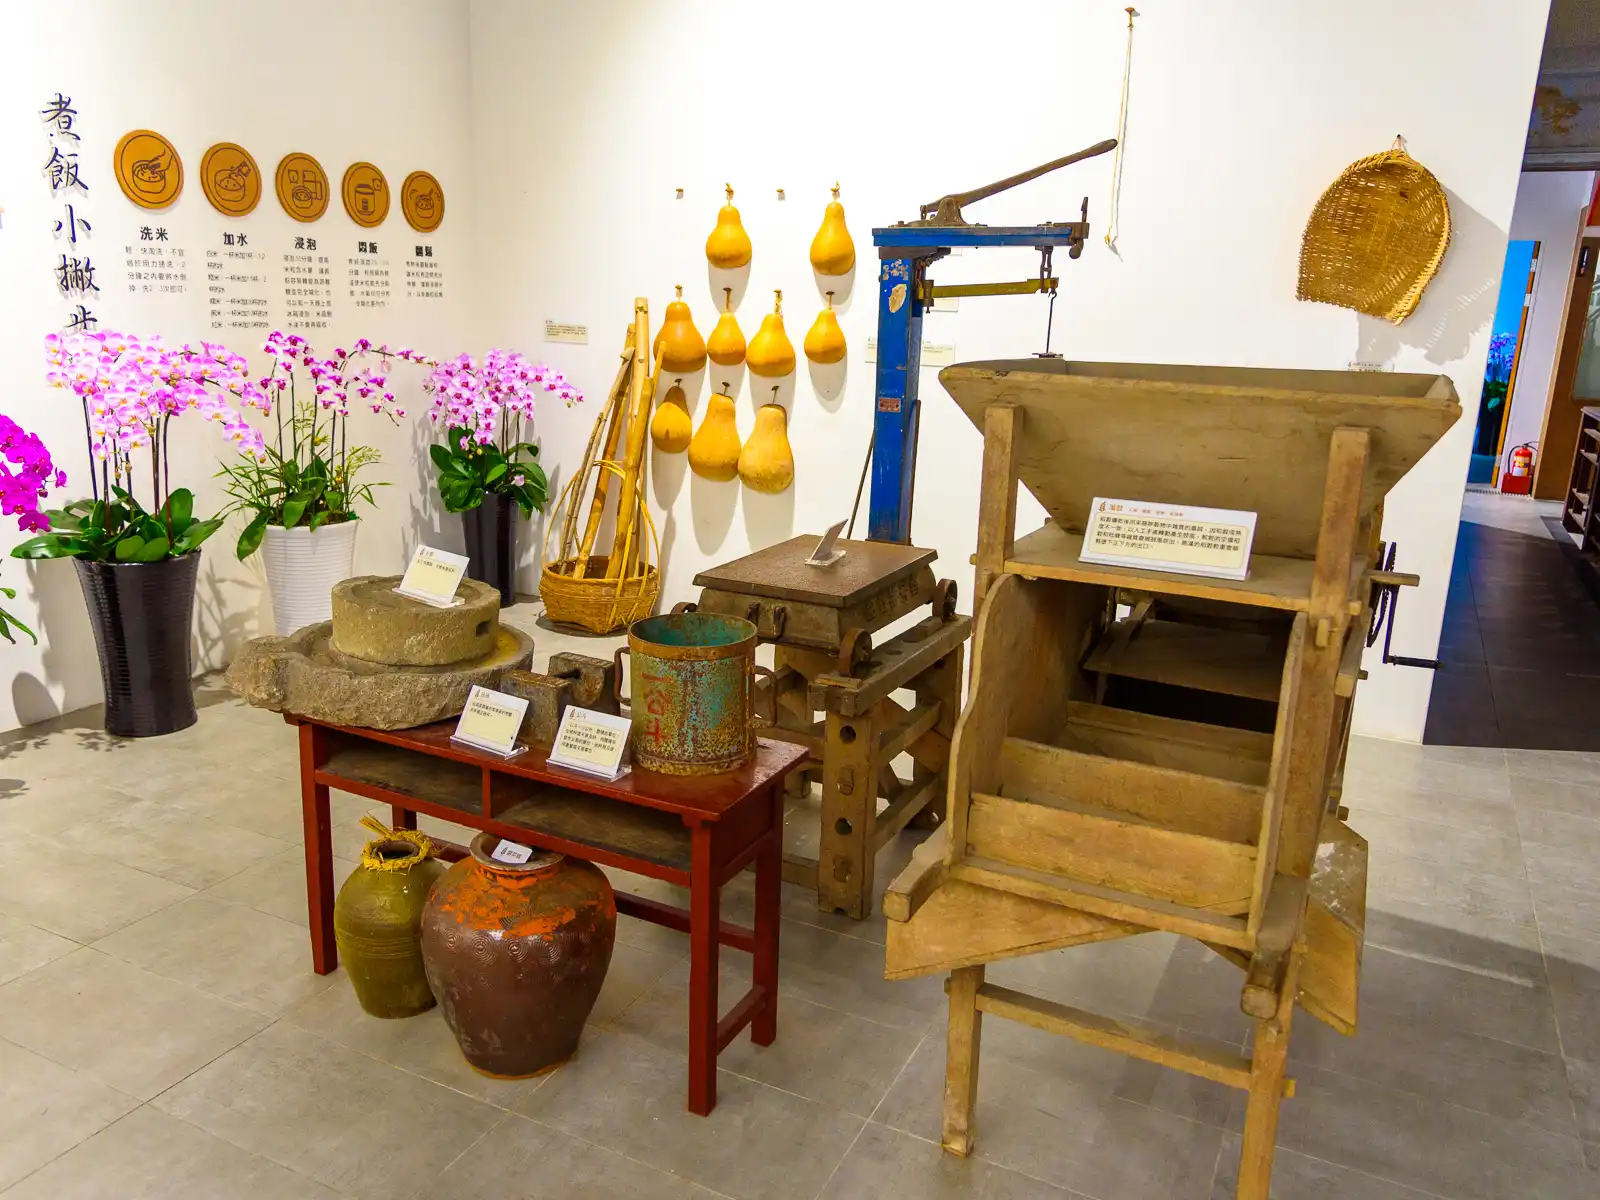 Stone and wooden tools used for the milling and husking of rice are on display.